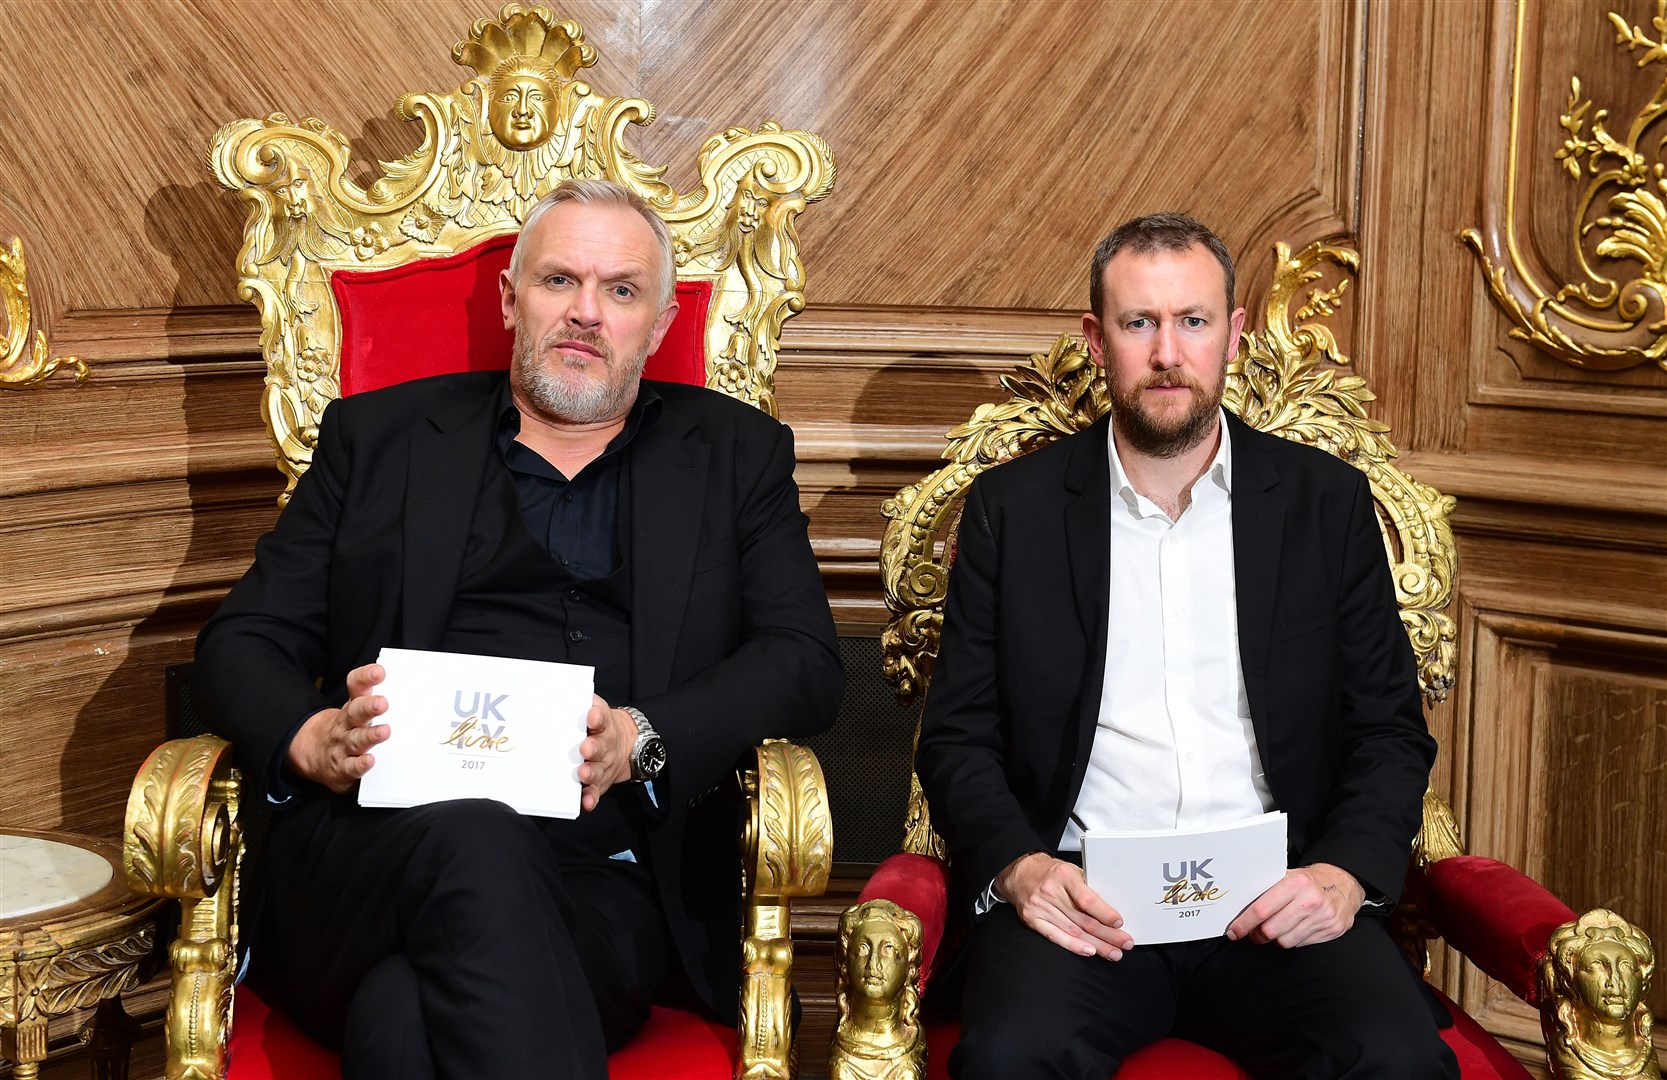 Taskmaster host Greg Davies left and creator Alex Horne (right). Competing in Taskmaster-style challenges virtually with friends can liven up a lockdown birthday (Ian West/PA)